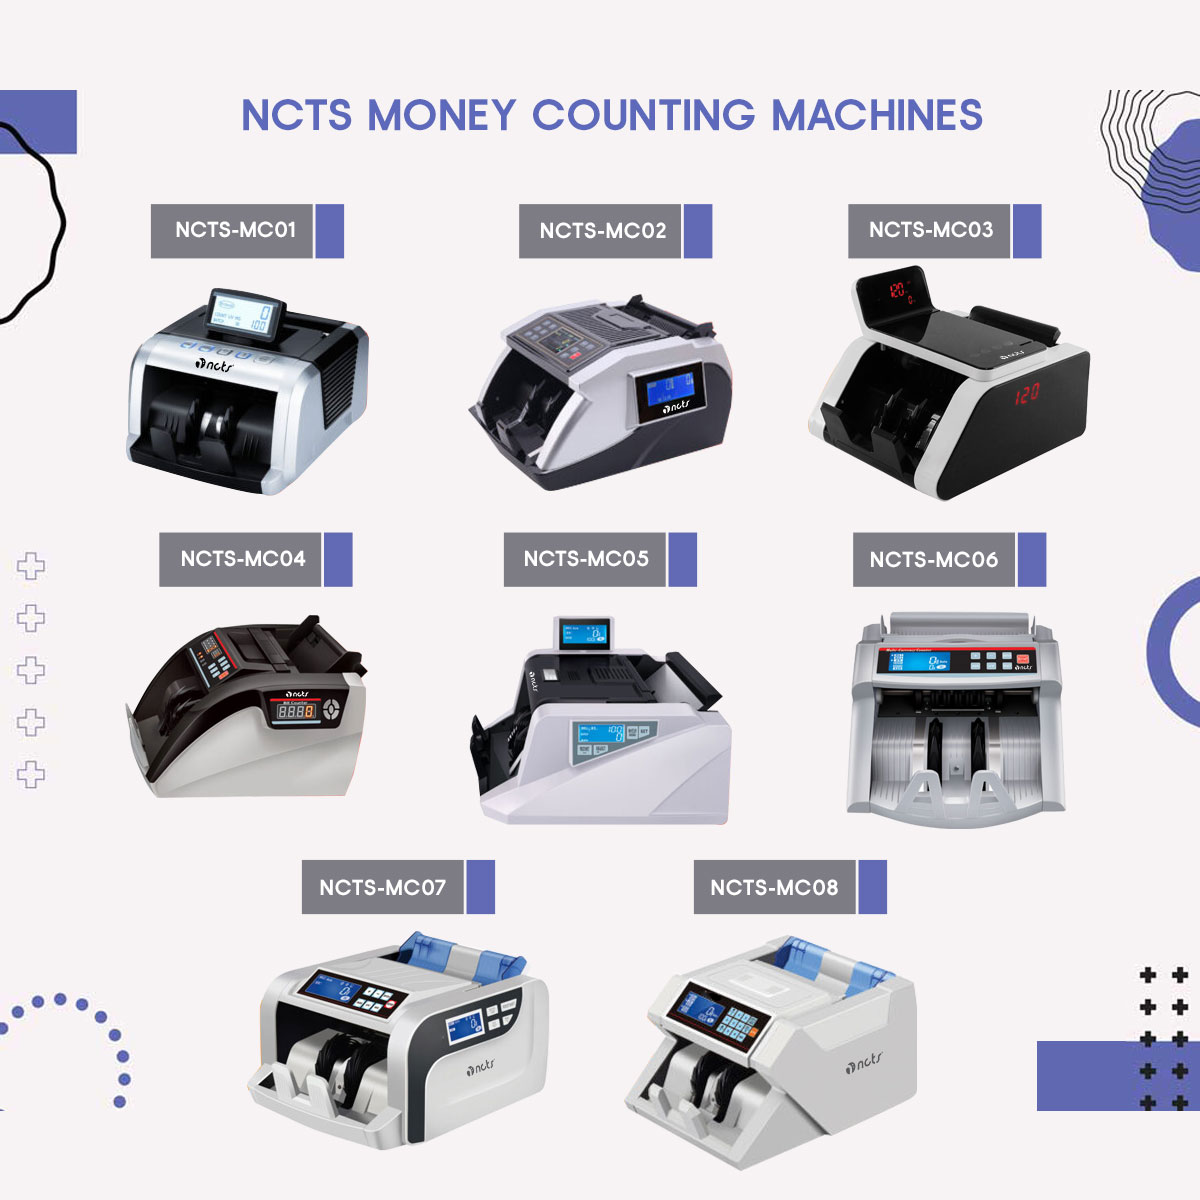 NCTS MONEY COUNTER